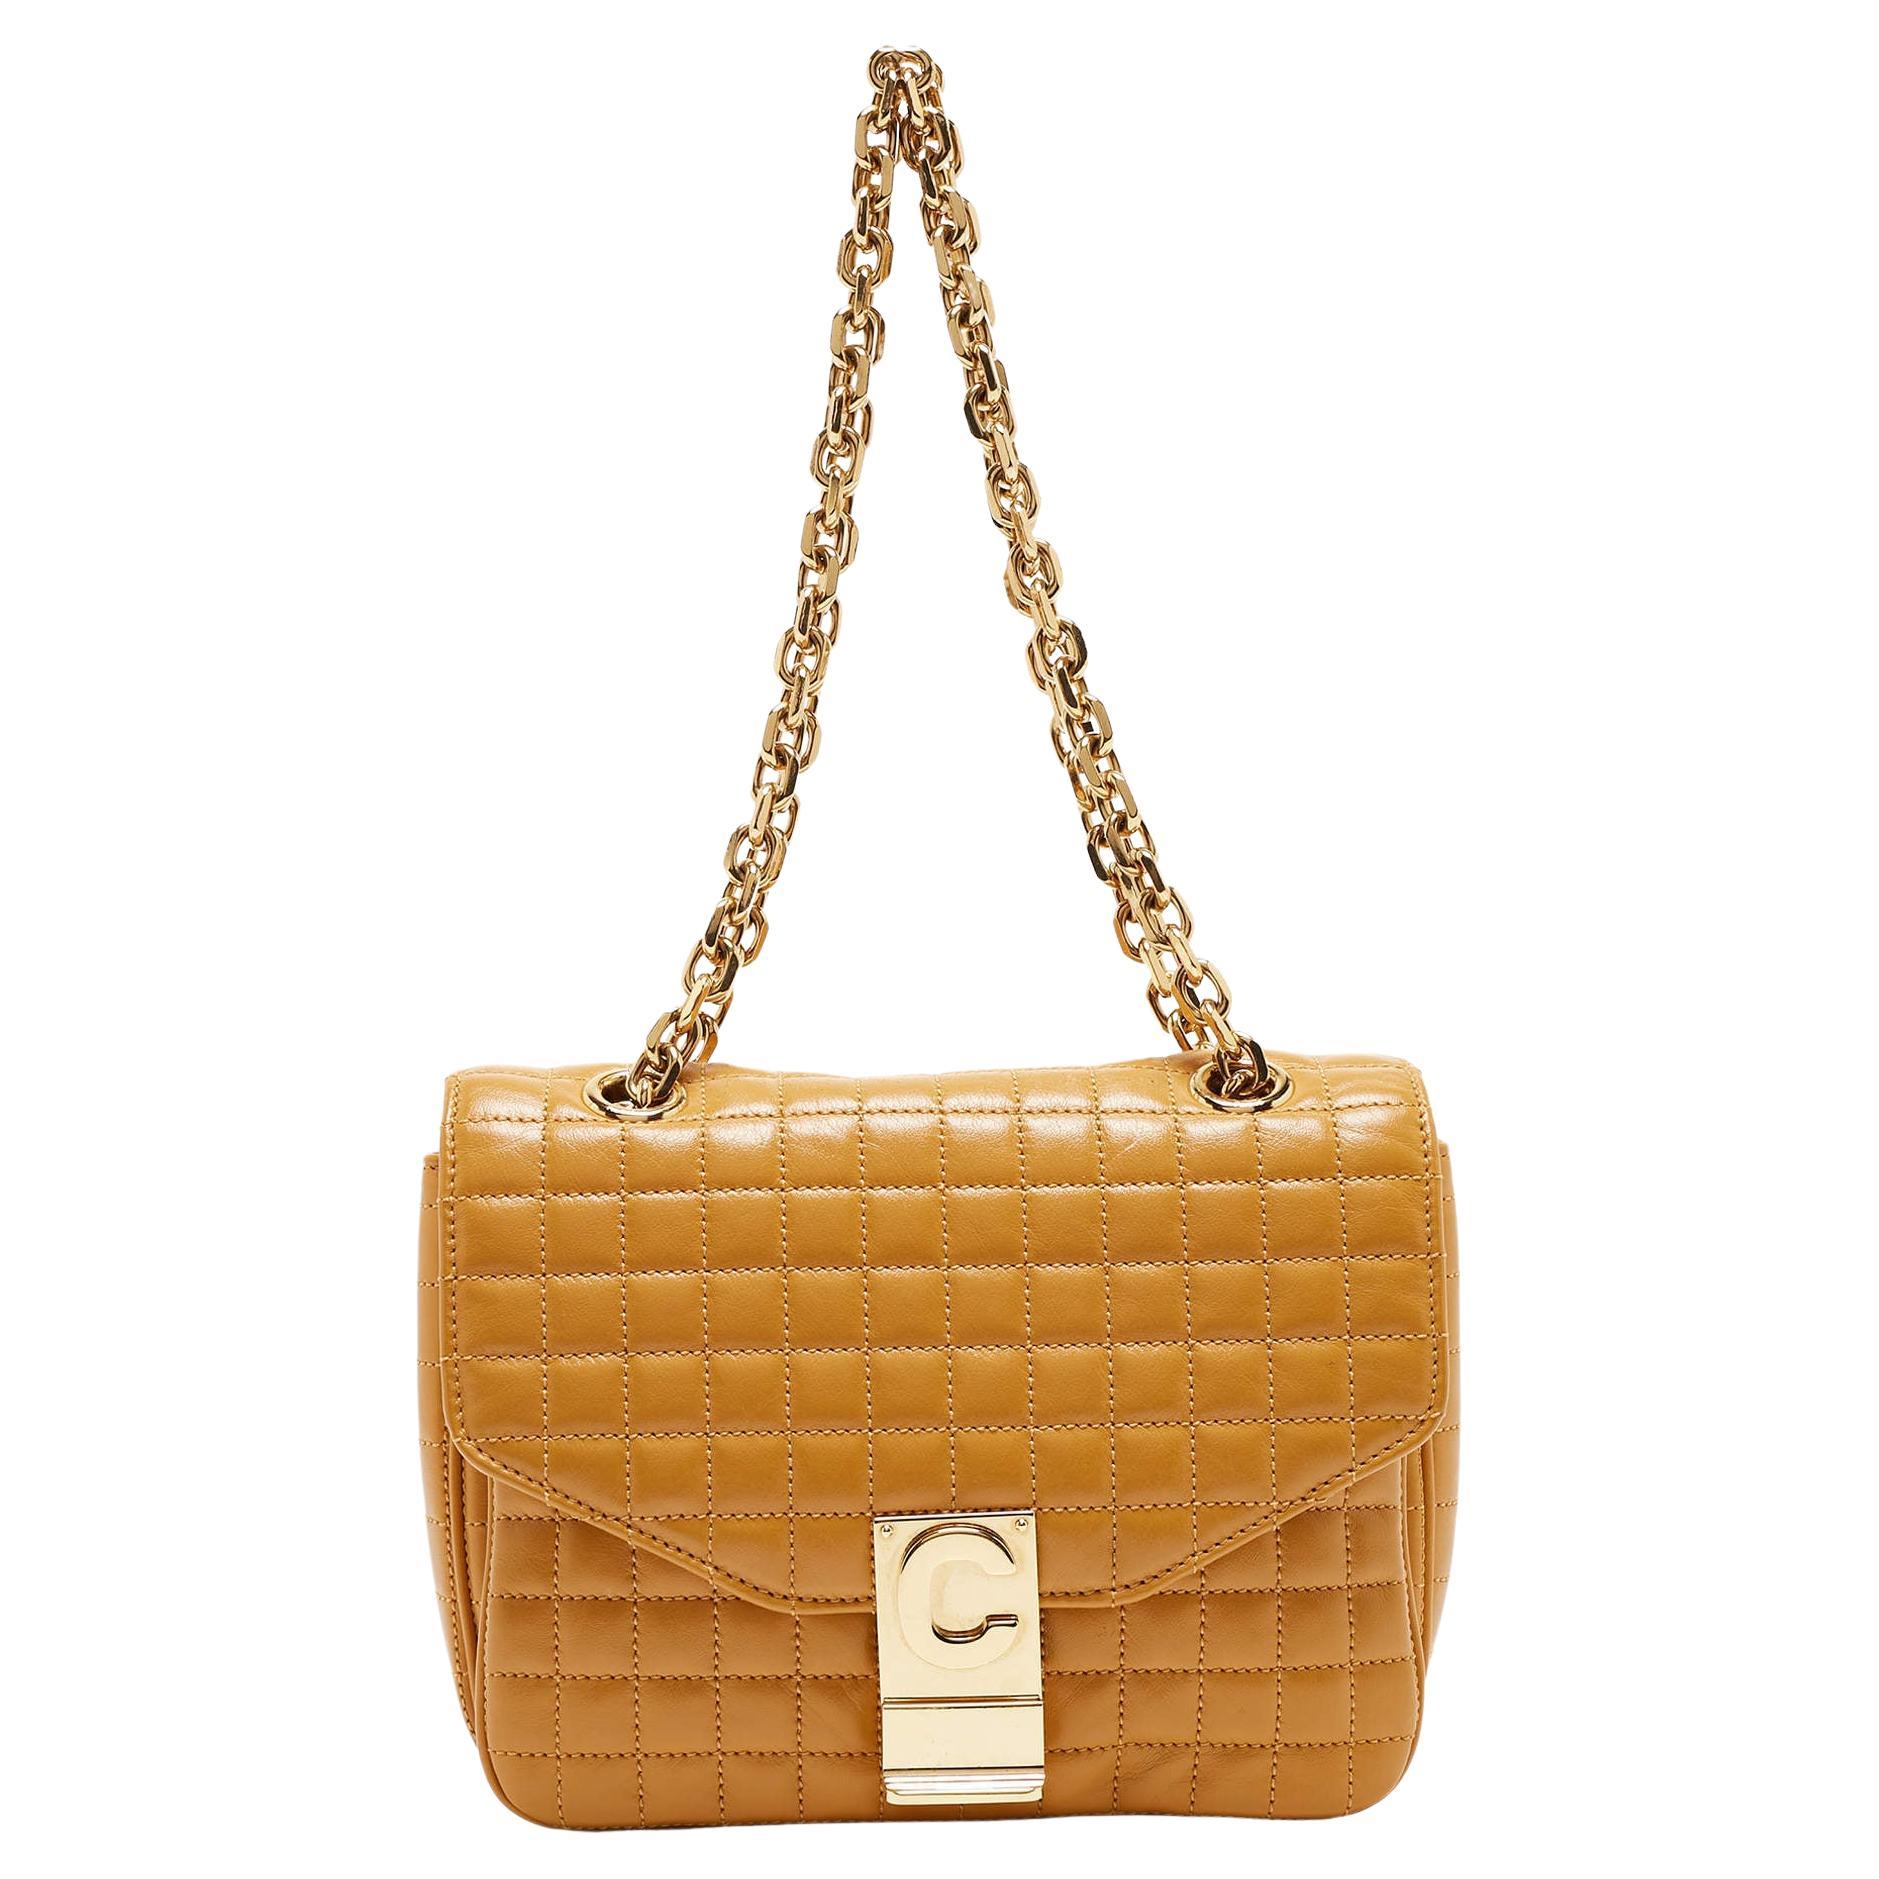 Celine Tan Quilted Leather Small C Flap Bag For Sale